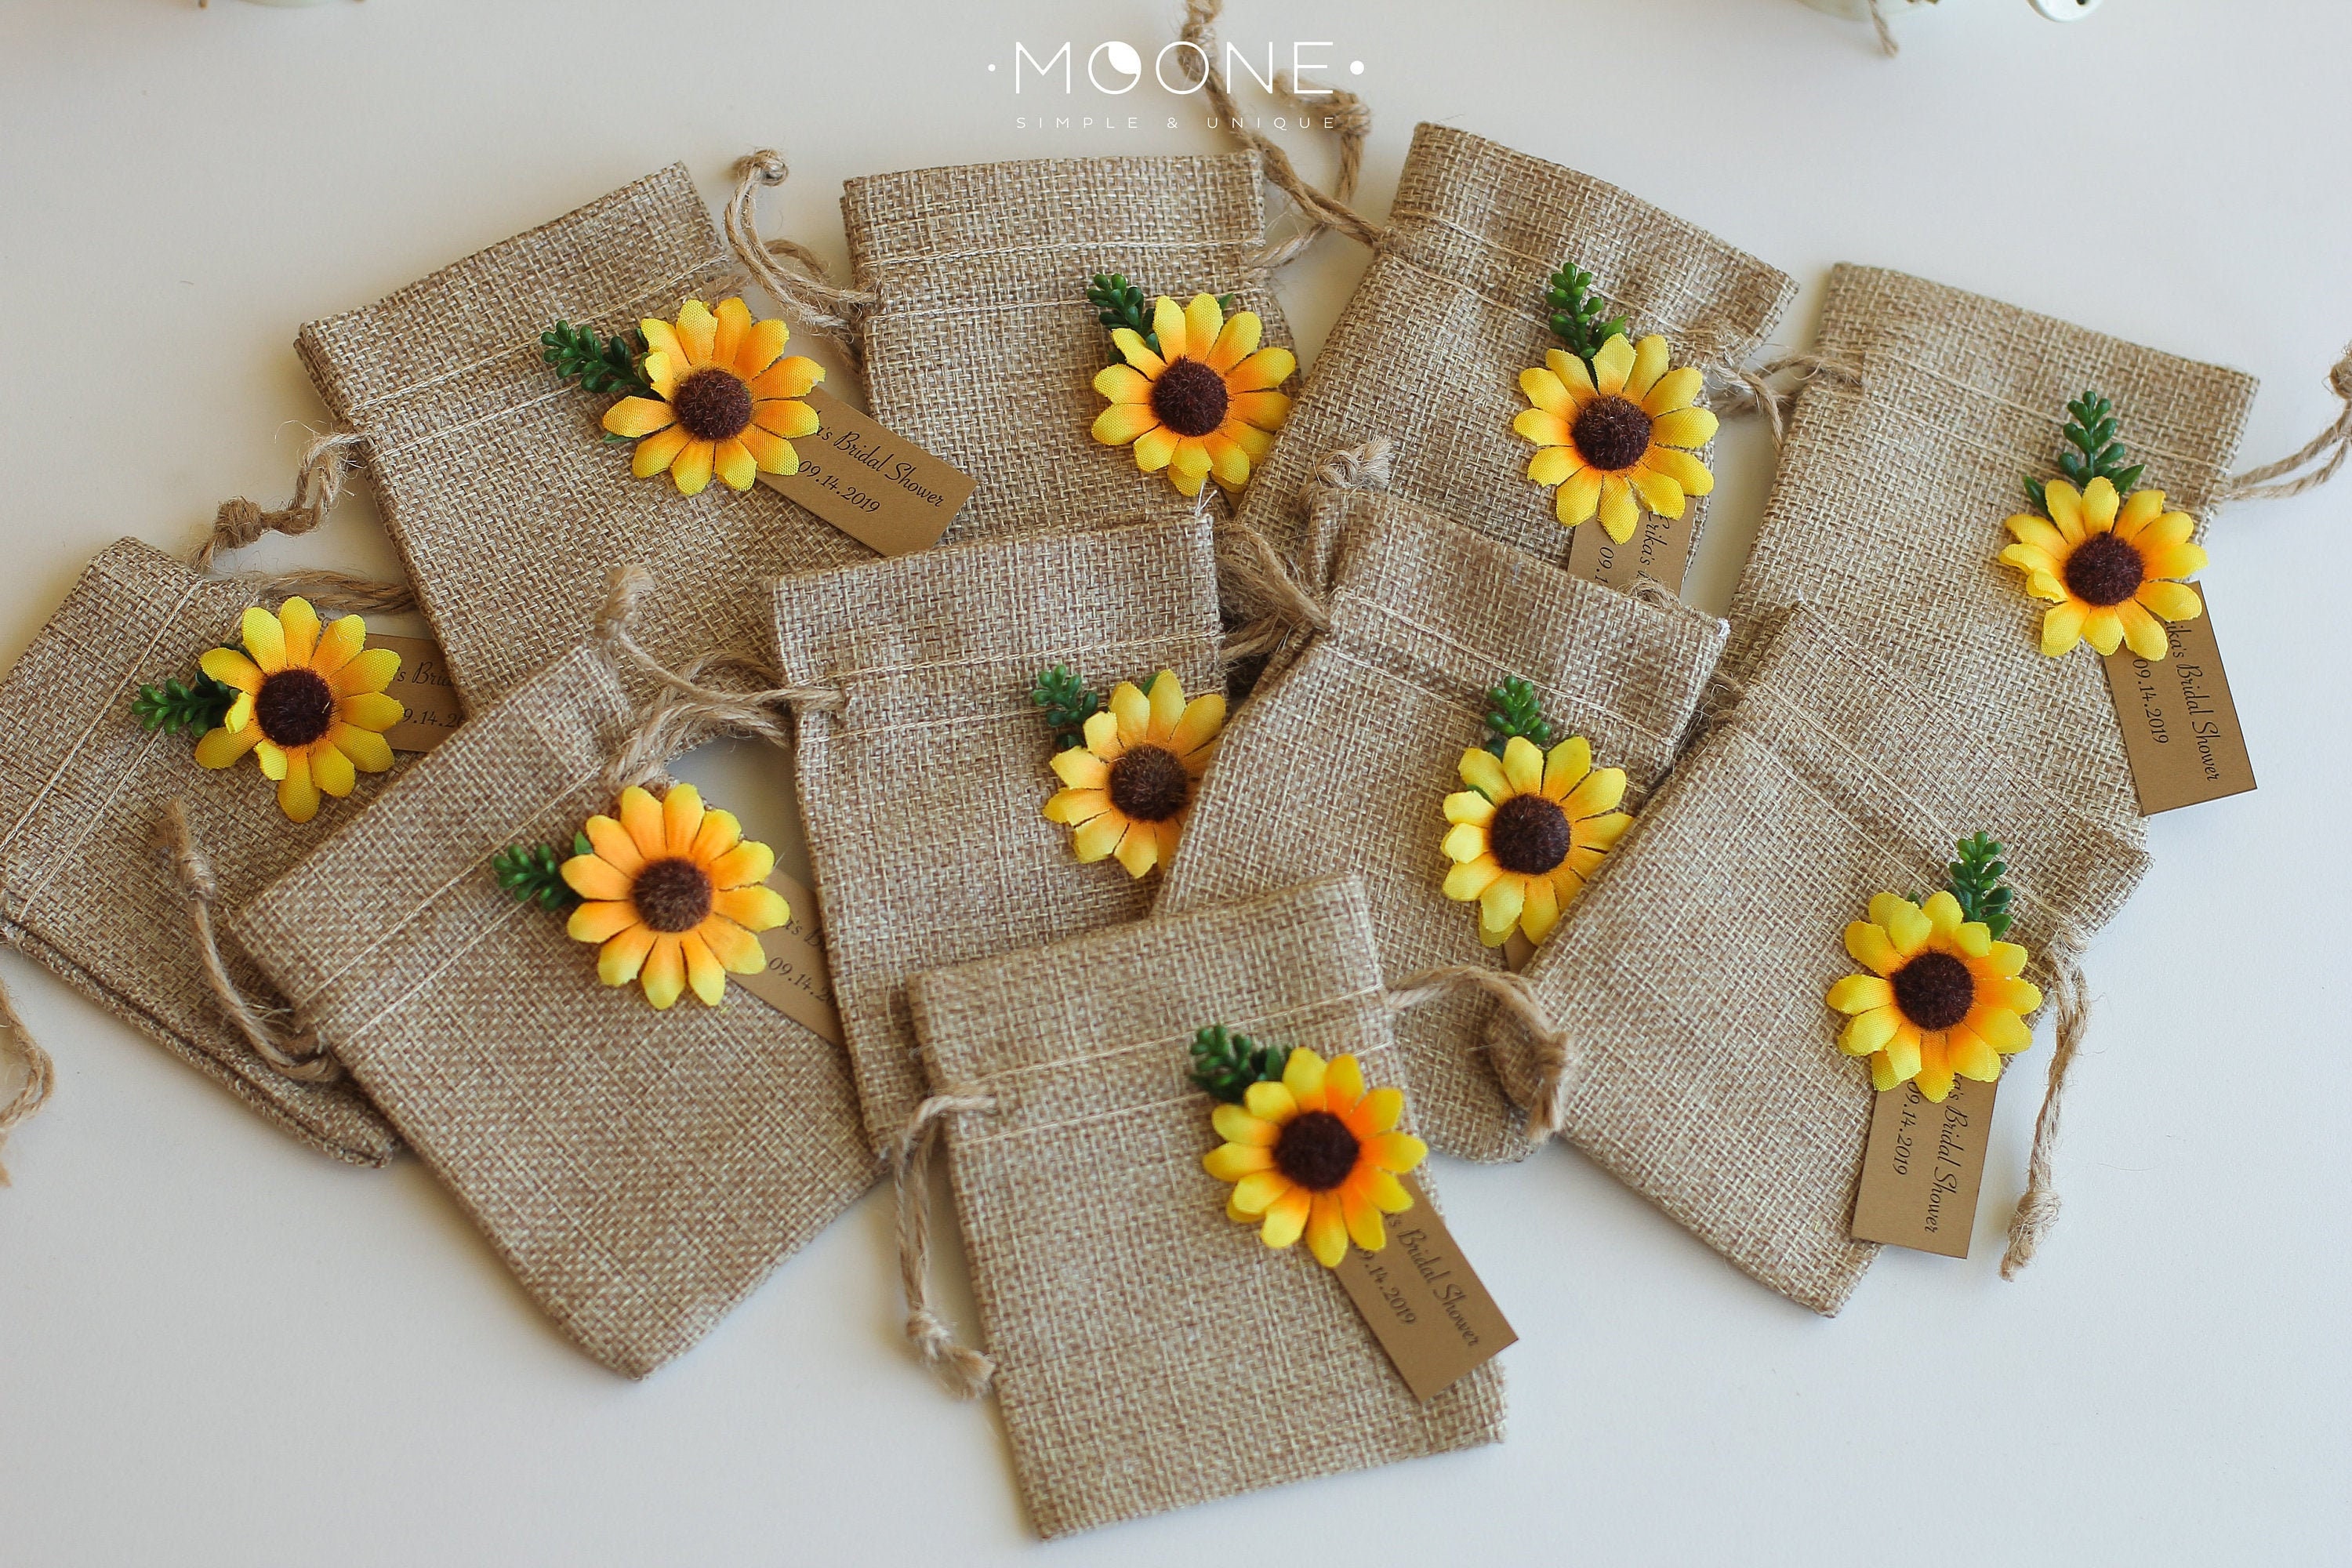 Set Of 10 Personalized Wedding Gift For Guests, Sunflower Wedding Gift, Burlap Favor Bags, Rustic Bags Favor, Party